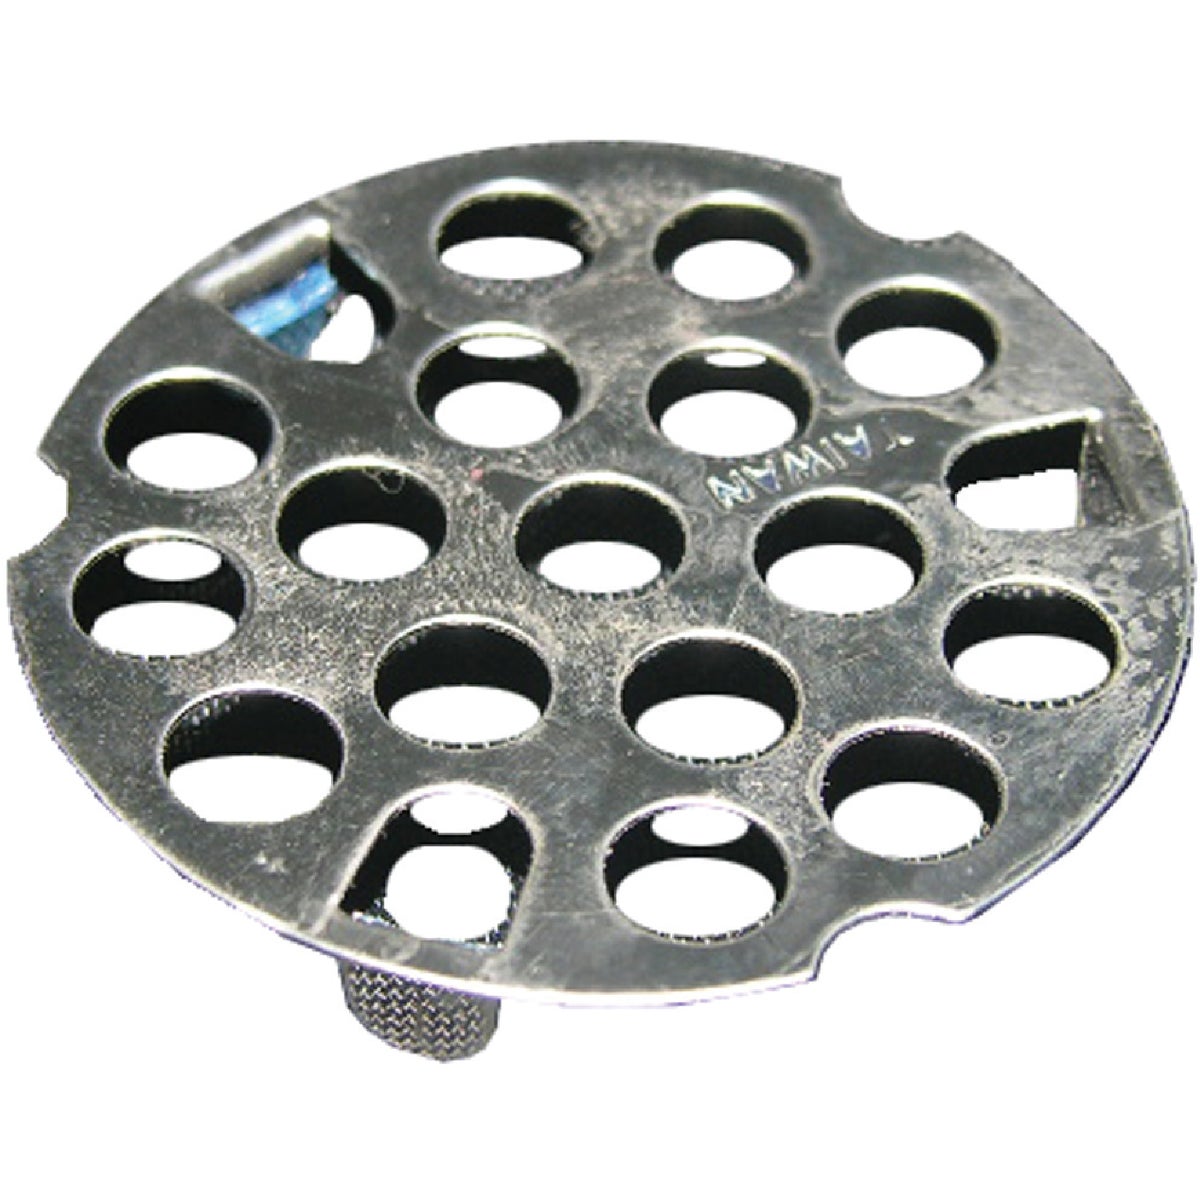 Lasco 1-7/8 In. Snap-In Tub Drain Strainer with Chrome Plated Finish